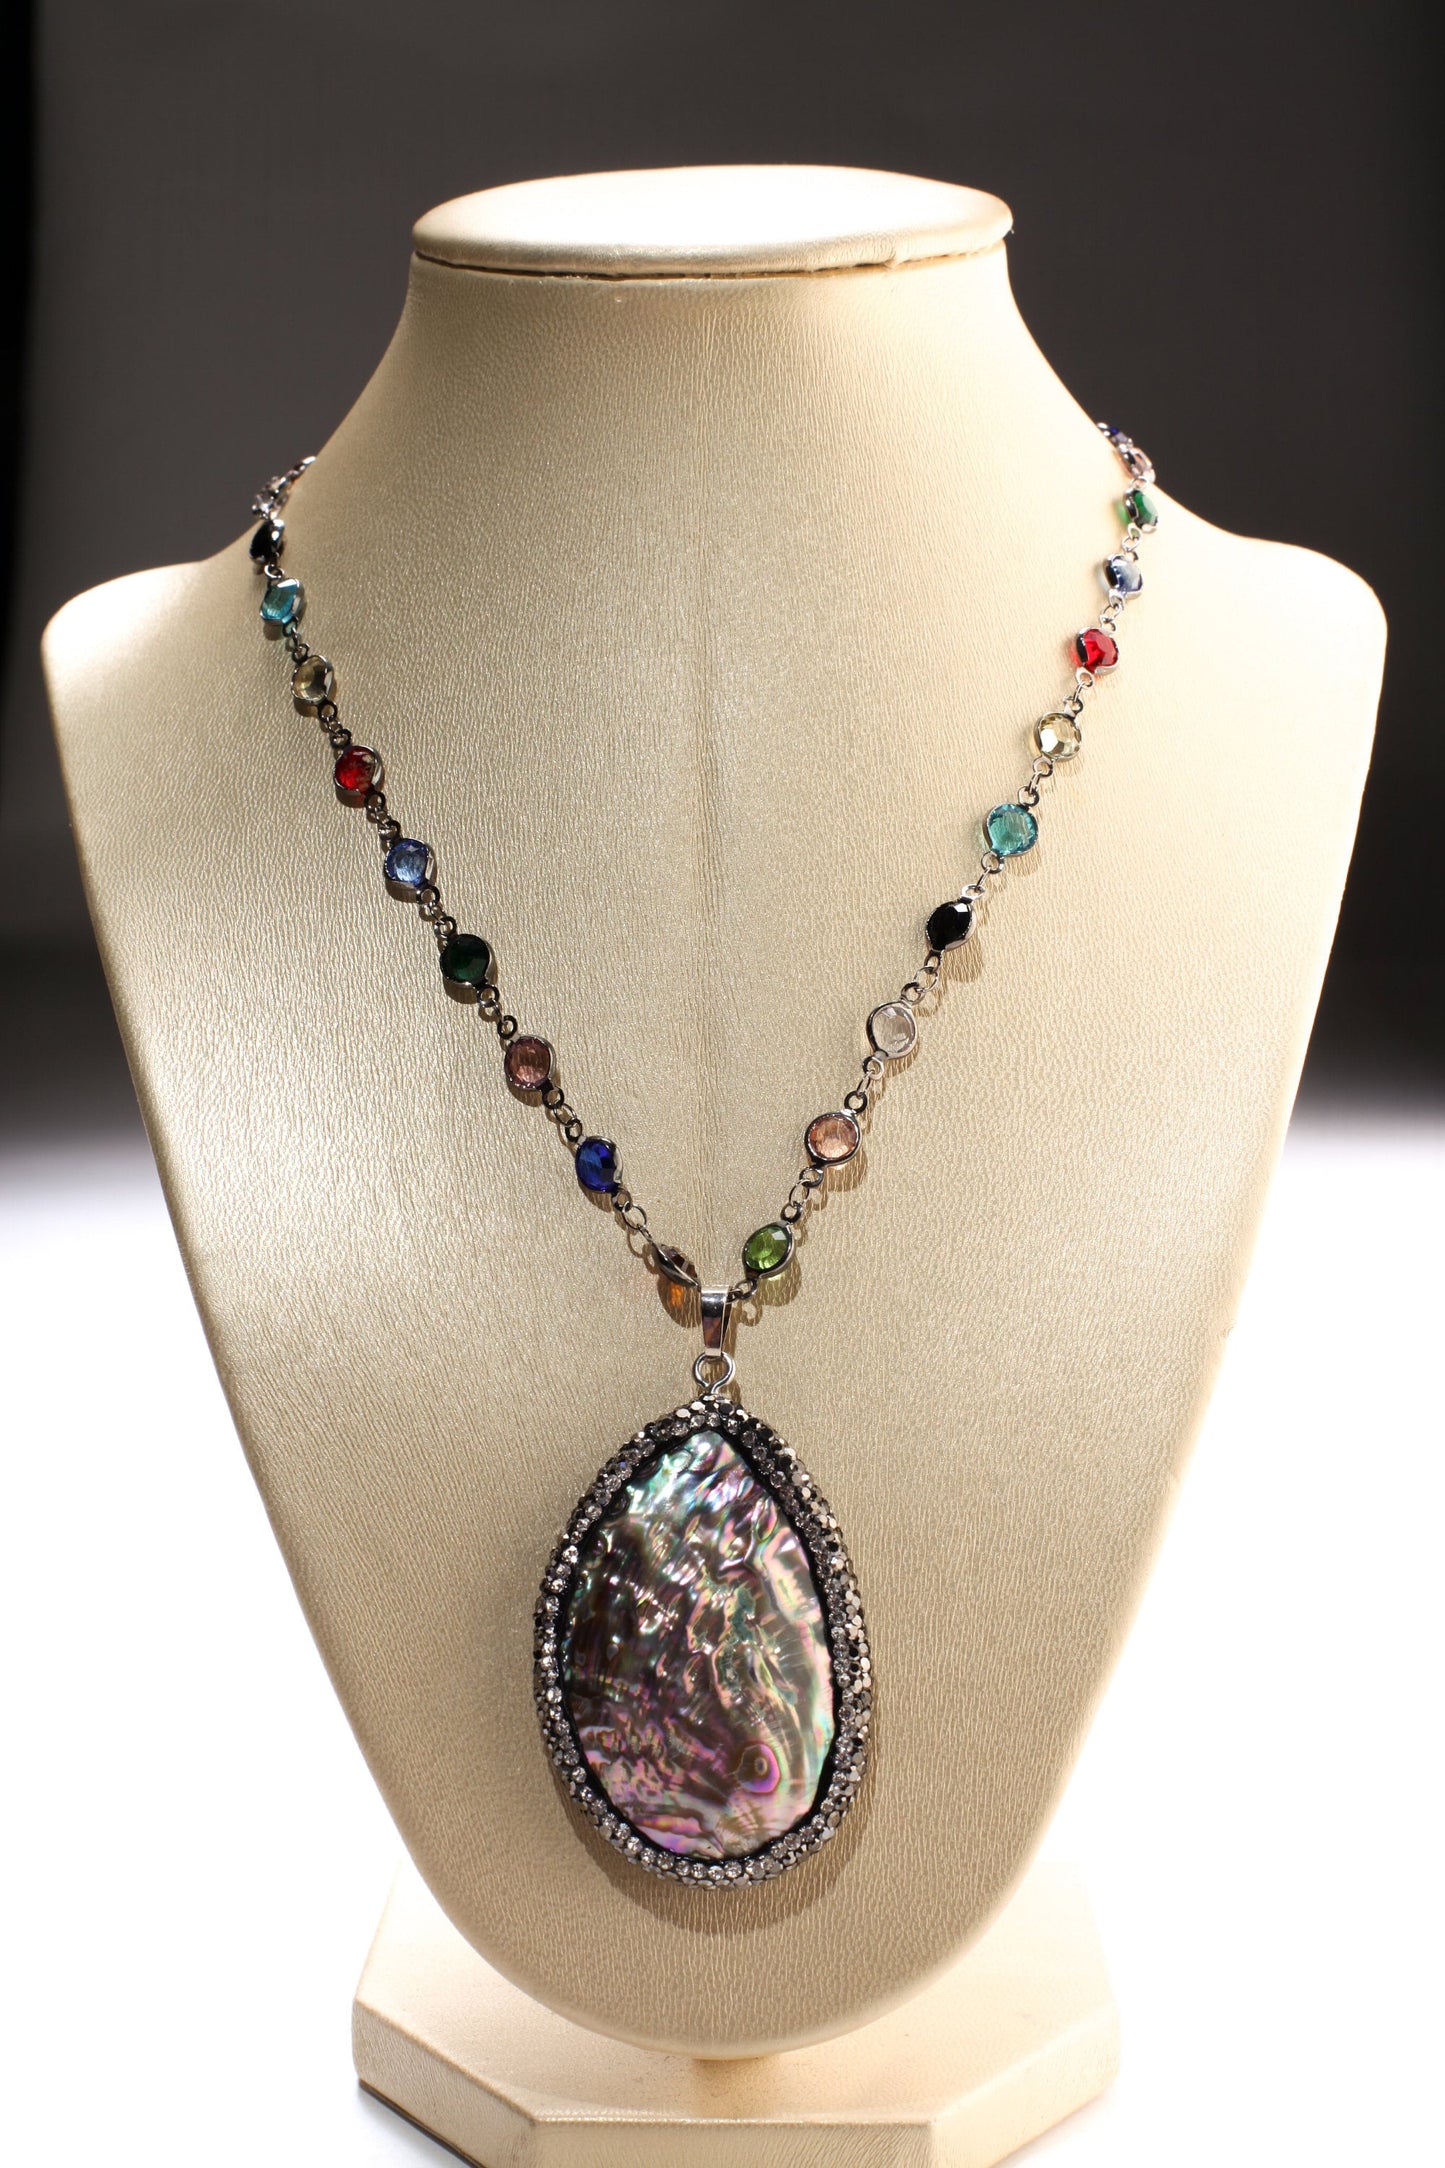 Abalone CZ Pave Marcasite Style 36x53mm Pendant Multi Crystal Quartz Beaded Bezel Chain in Oxidized Silver Chain 21" Necklace